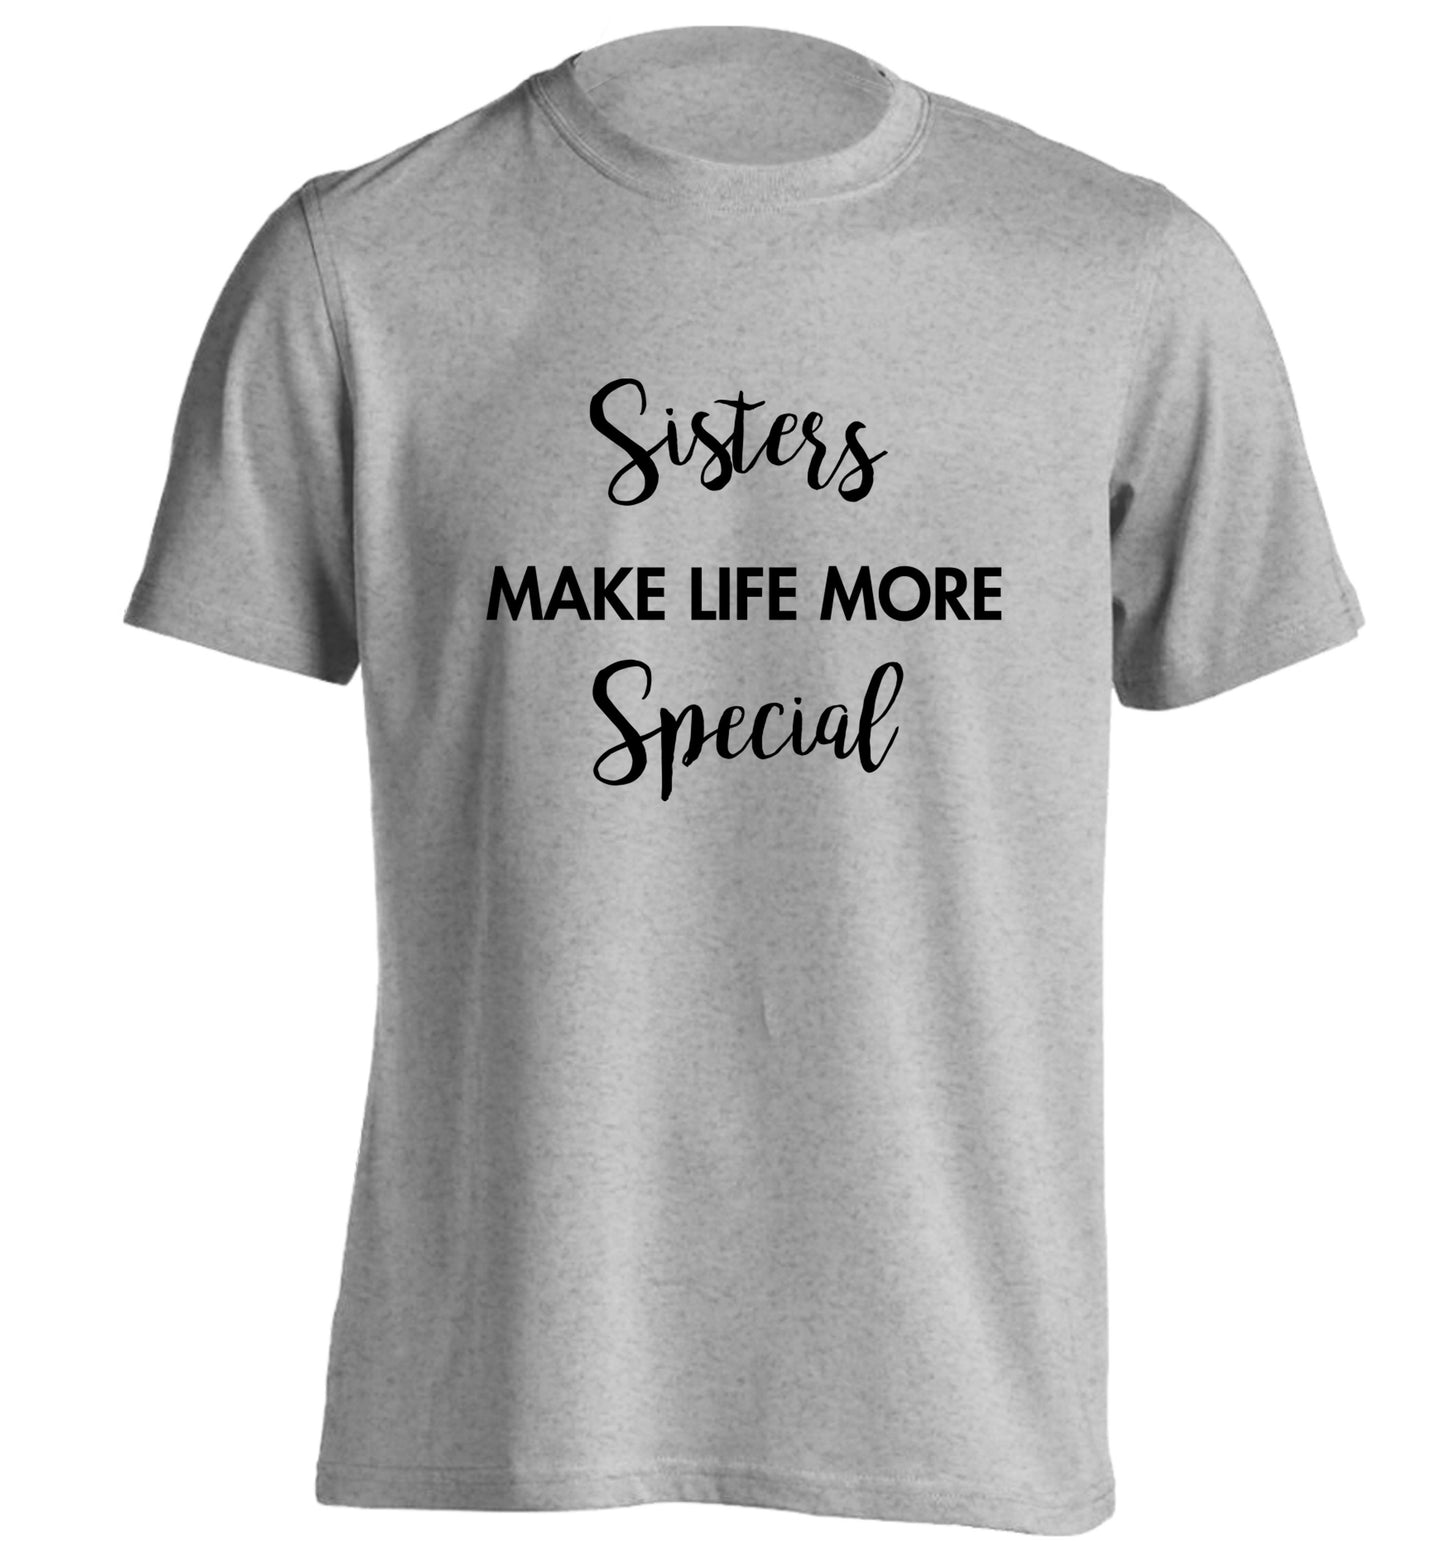 Sisters make life more special adults unisex grey Tshirt 2XL